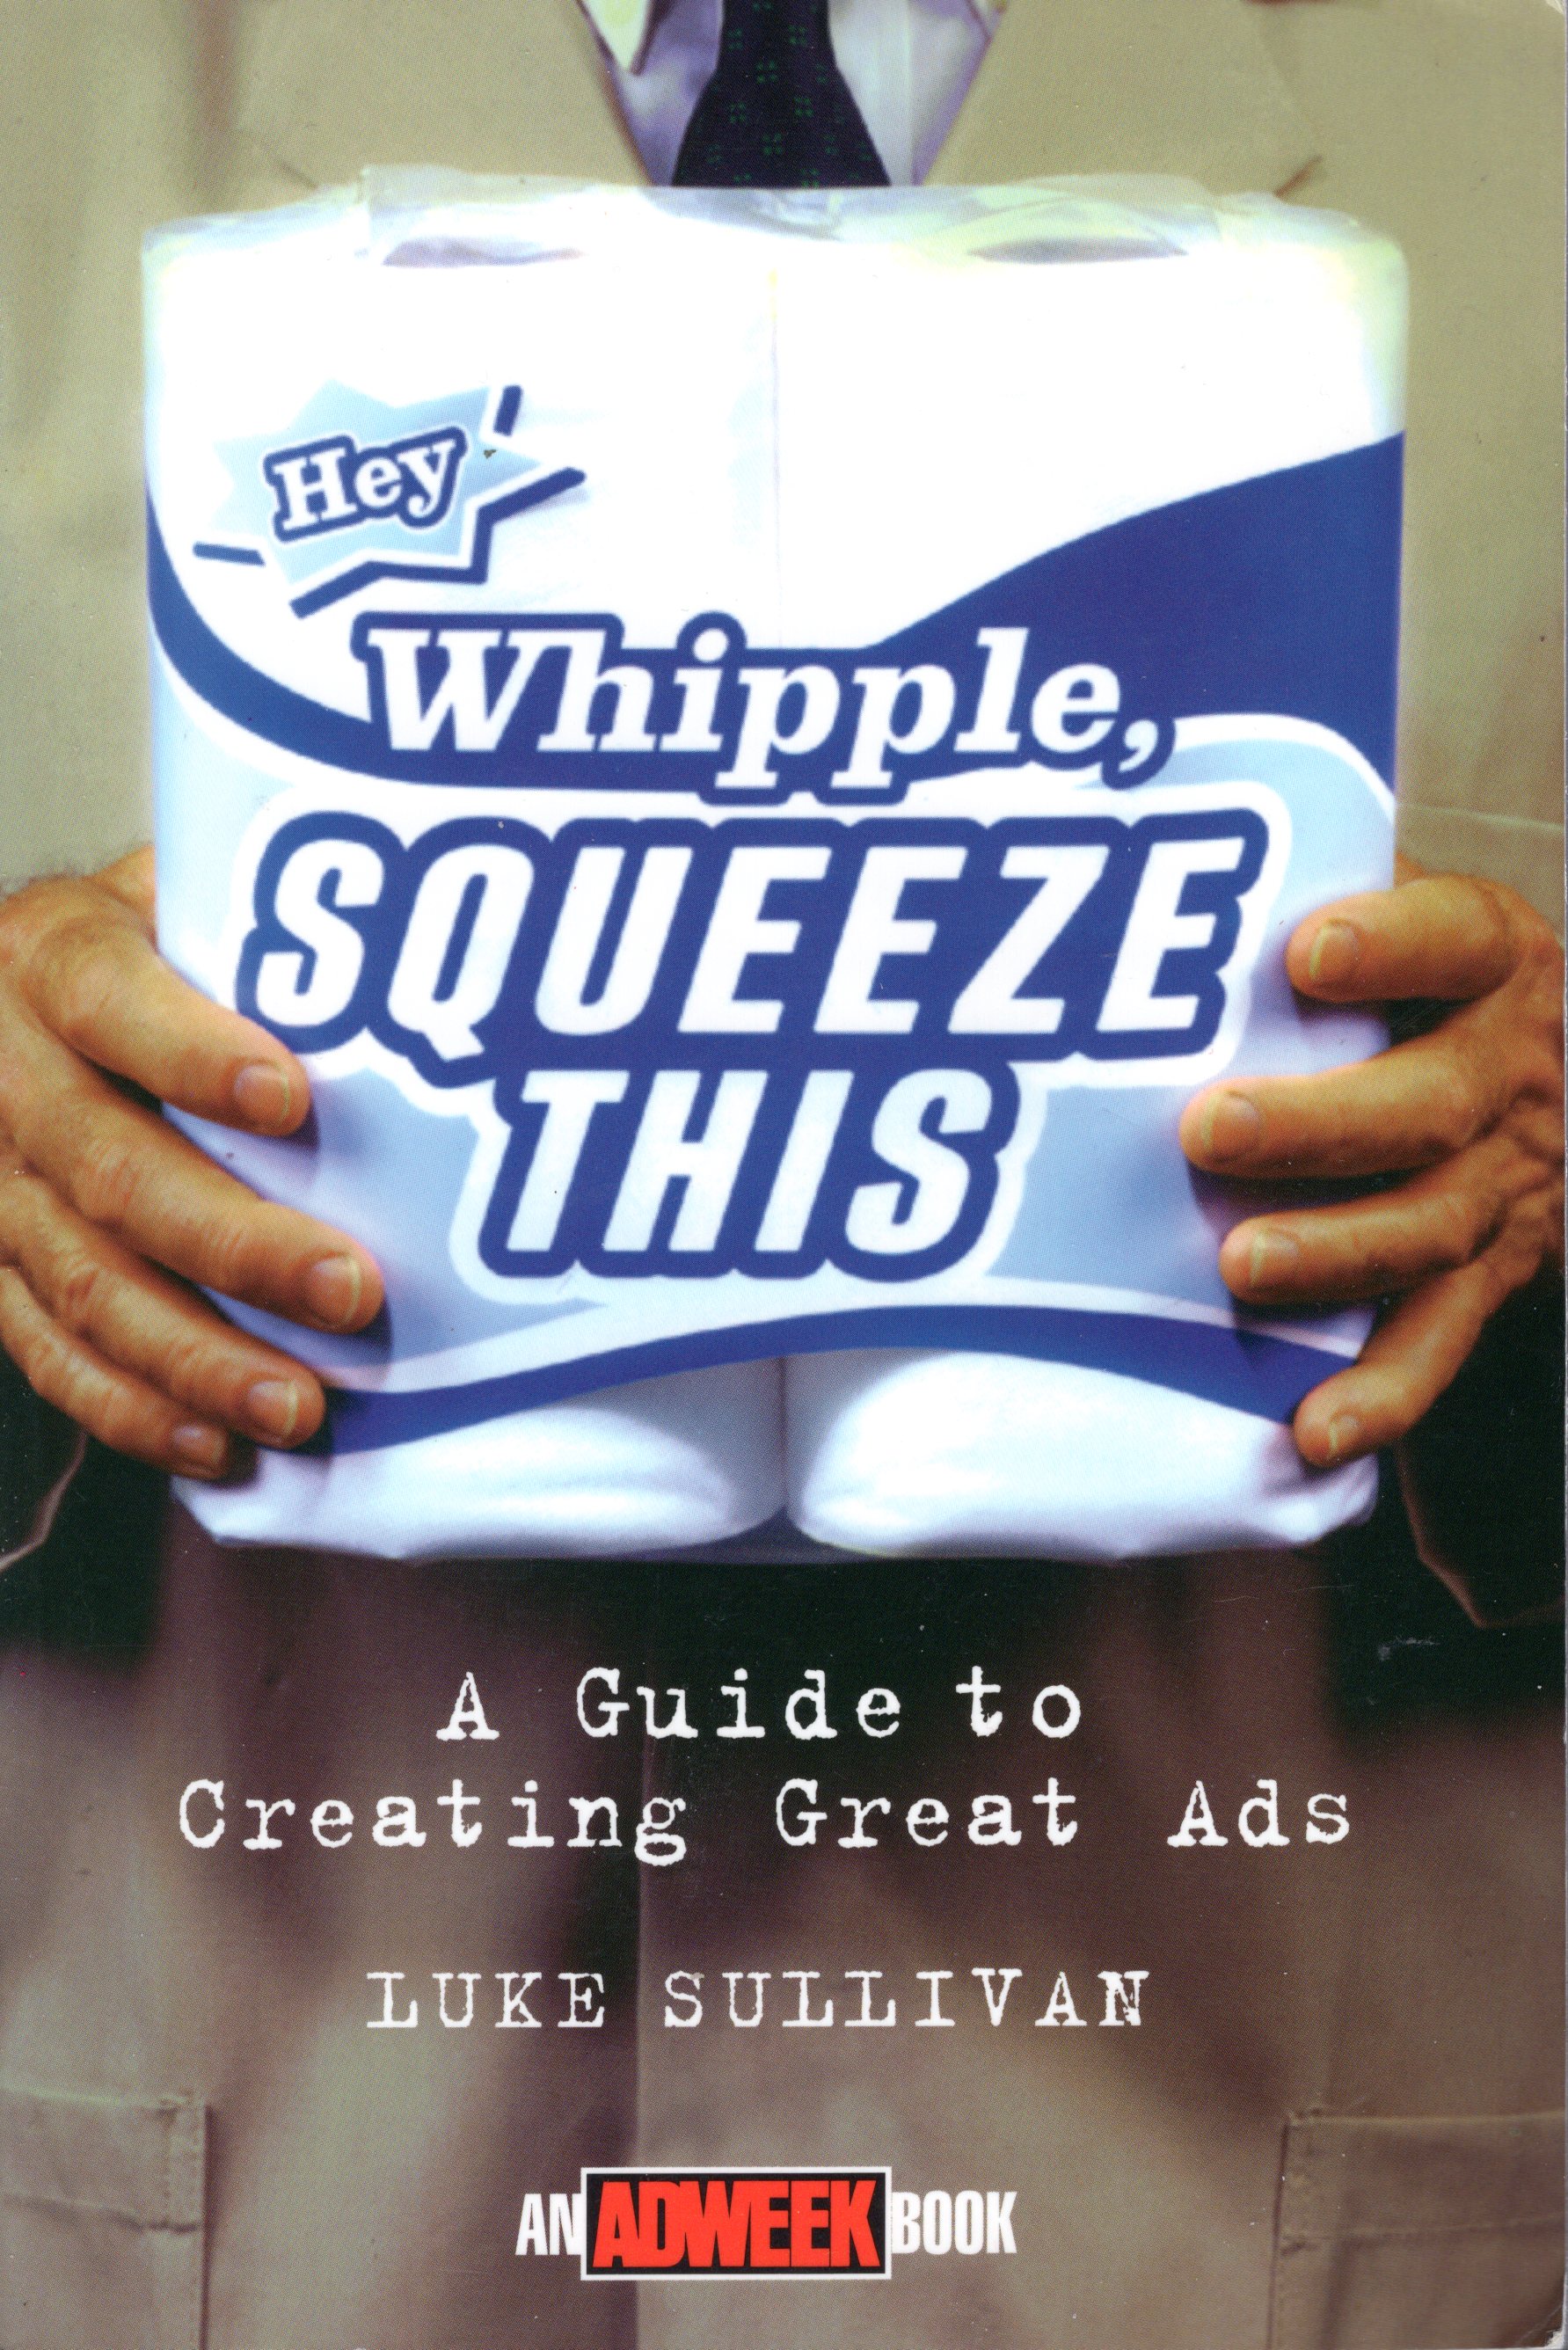 Image for Guide to Creating Great Ads: Whipple, Squeeze This